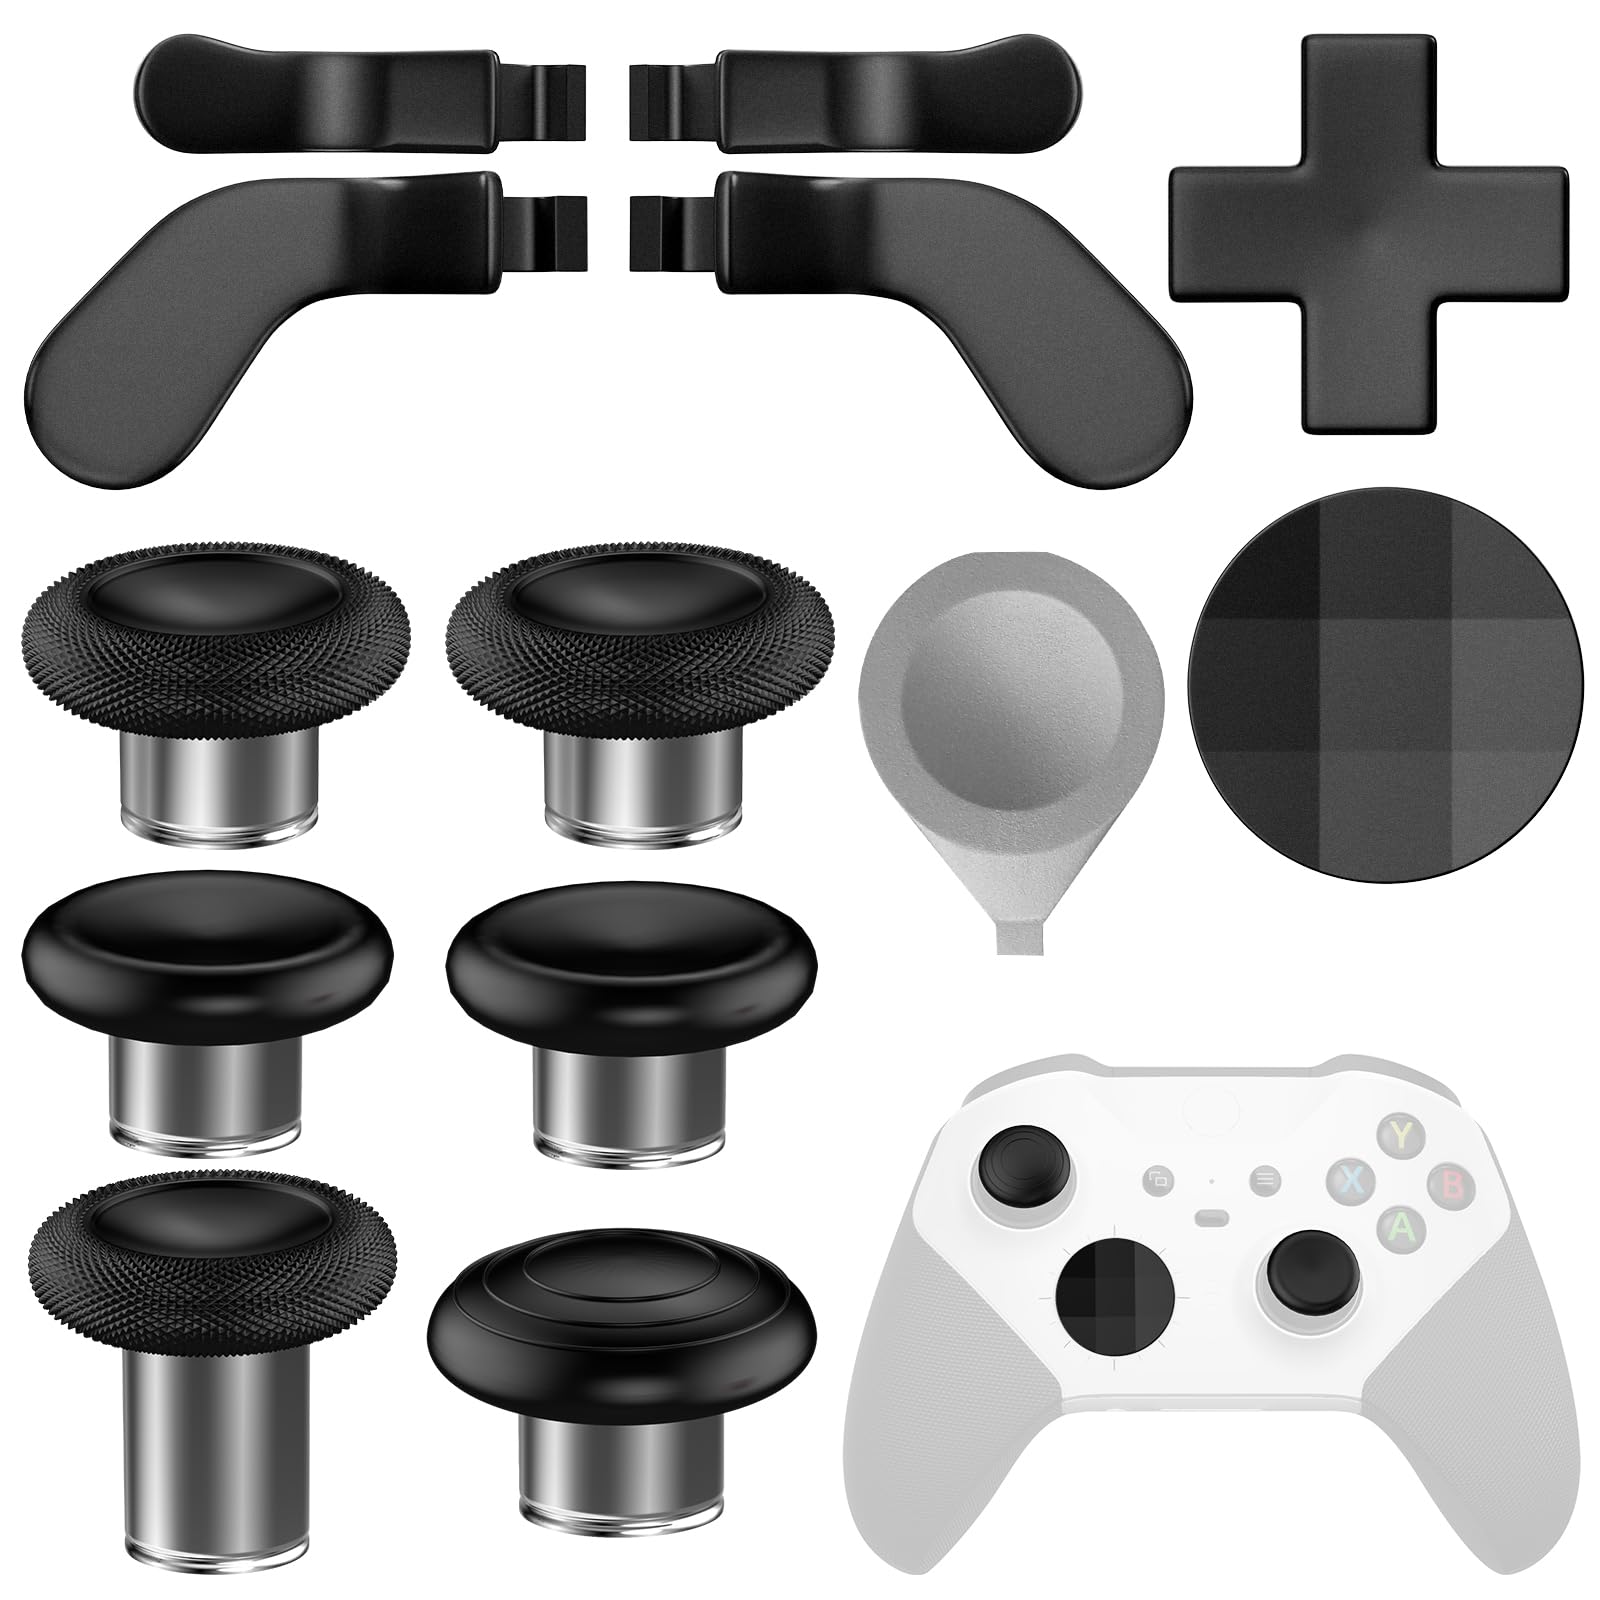 SHINHOME 13 in 1 Metal Thumbsticks for Xbox One Elite Series 2, Elite Series 2 Controller Accessories, Gaming Accessory Replacement Metal Mod 6 Swap Joysticks, Paddles, D-Pads, Tool, Without Bag - amzGamess